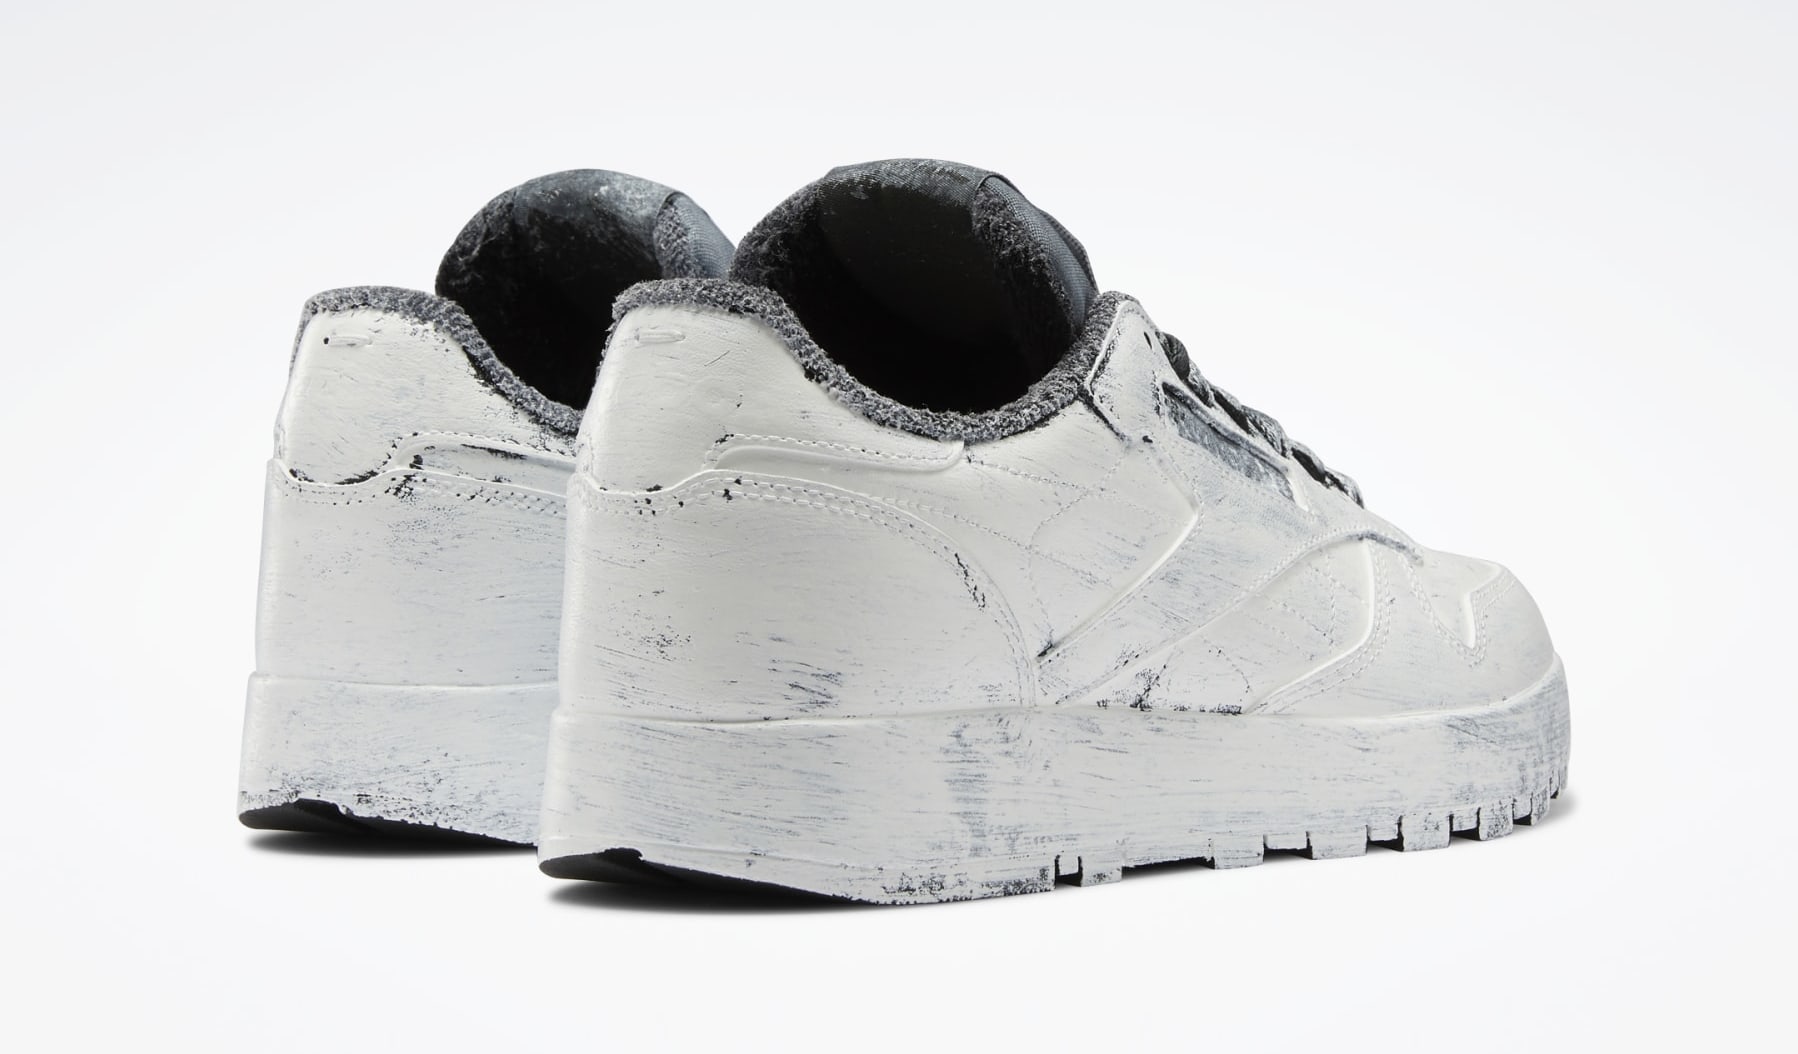 Maison Margiela x Reebok will take your trainer game to new heights